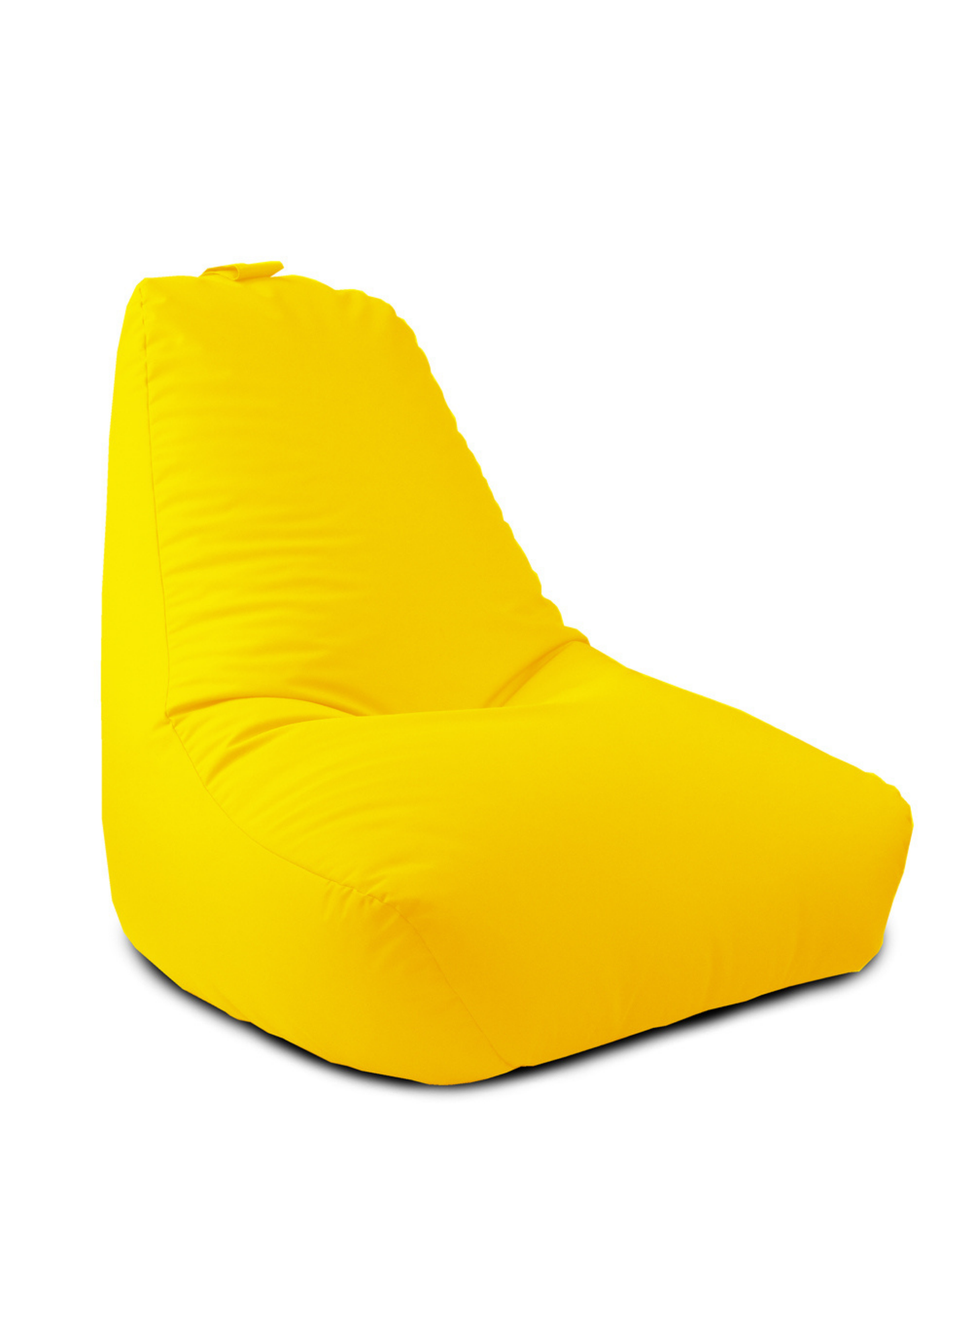 rucomfy Indoor/Outdoor Lounge Chair Yellow Beanbag (80cm Tapering to 58cm x 97cm x 82cm, Seat Height 33cm)